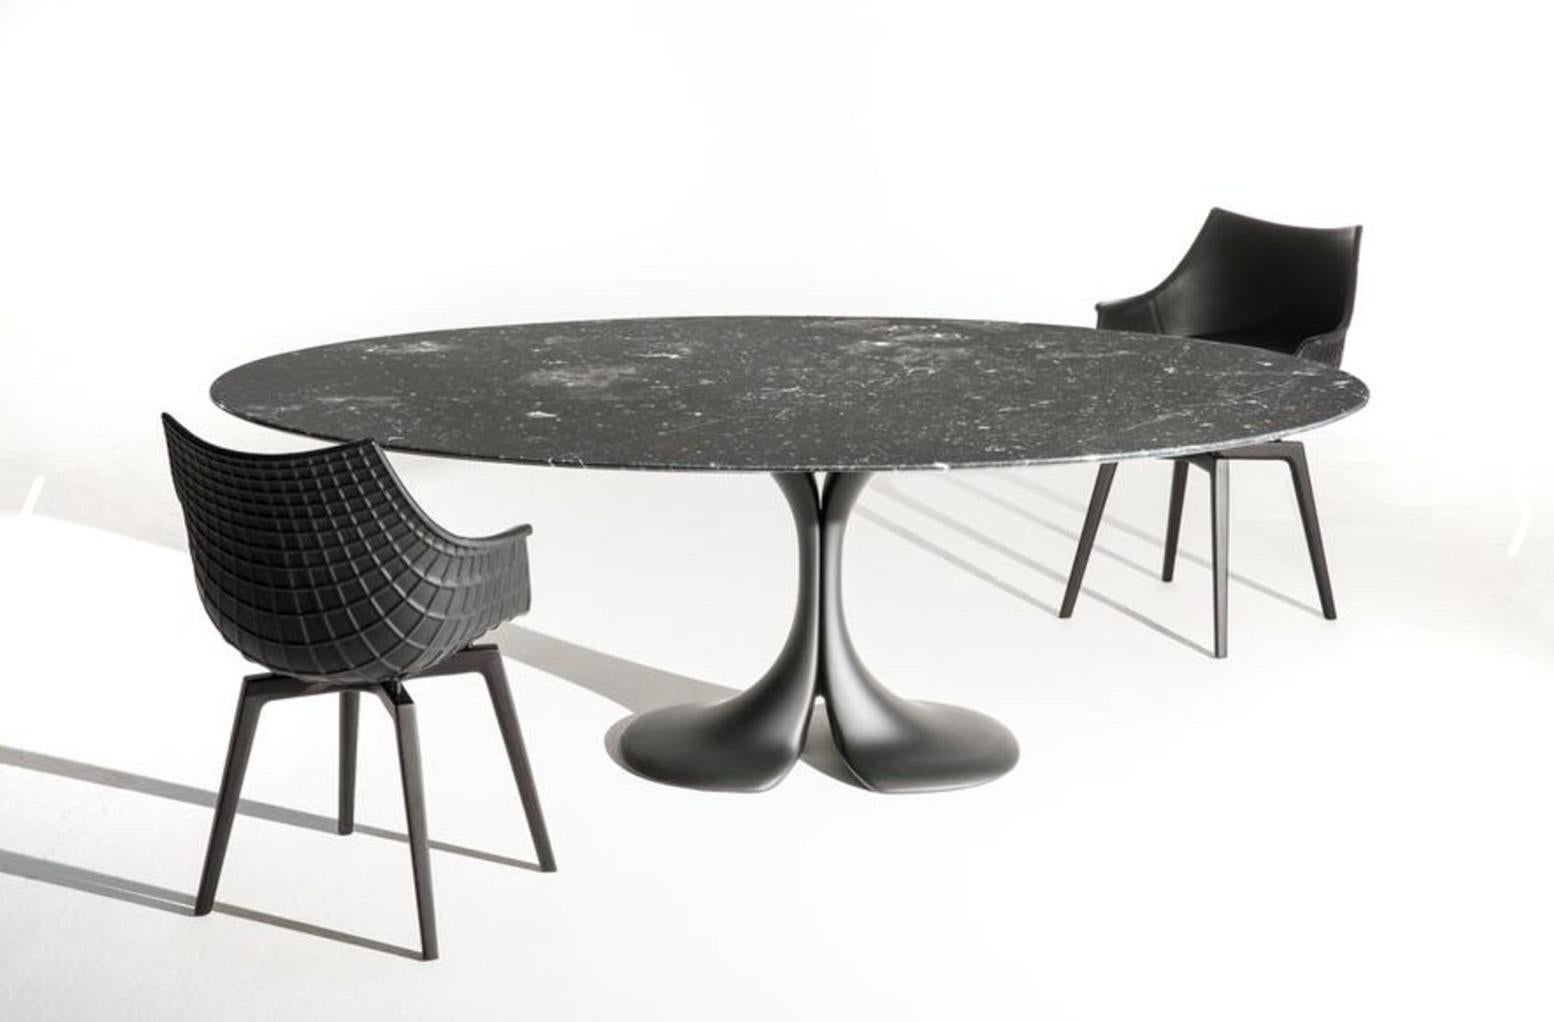 In a table, oval means perfect: no edge, no head of the table, no “odd” diner and, above all, a form expanded in space. Antonia Astori balance then the top elegant simplicity with a sculptural base made of a malleable as contemporary